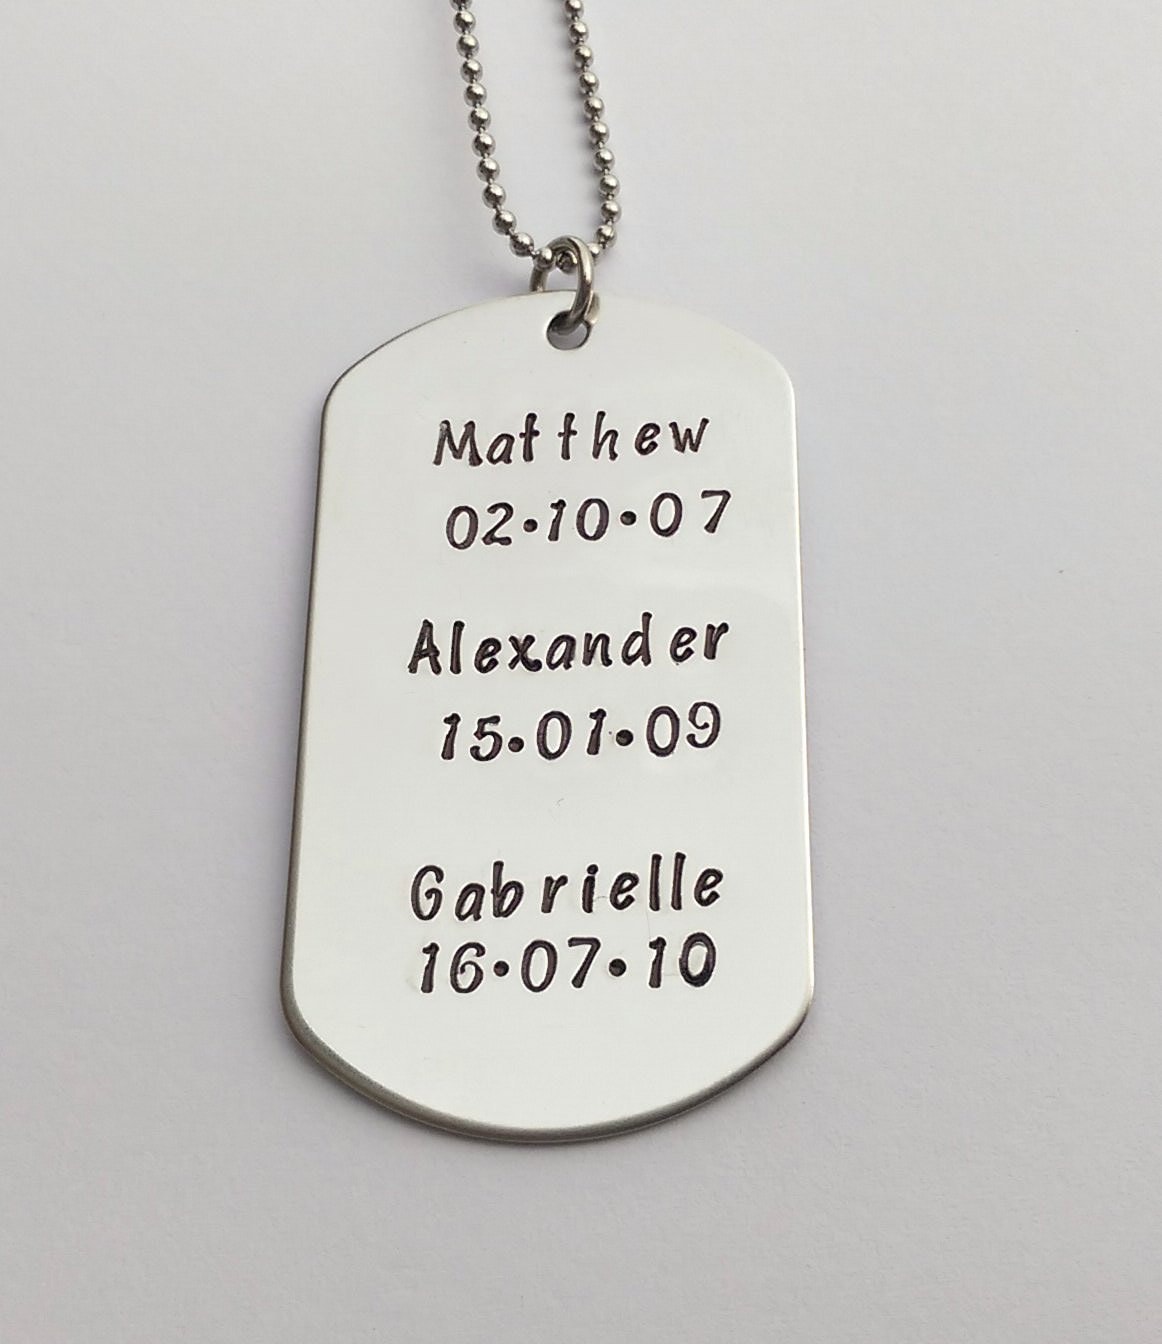 Personalised mens necklace - personalised mens dogtag - personalised dad present, childrens names birthdates, new daddy gift, mens jewellery